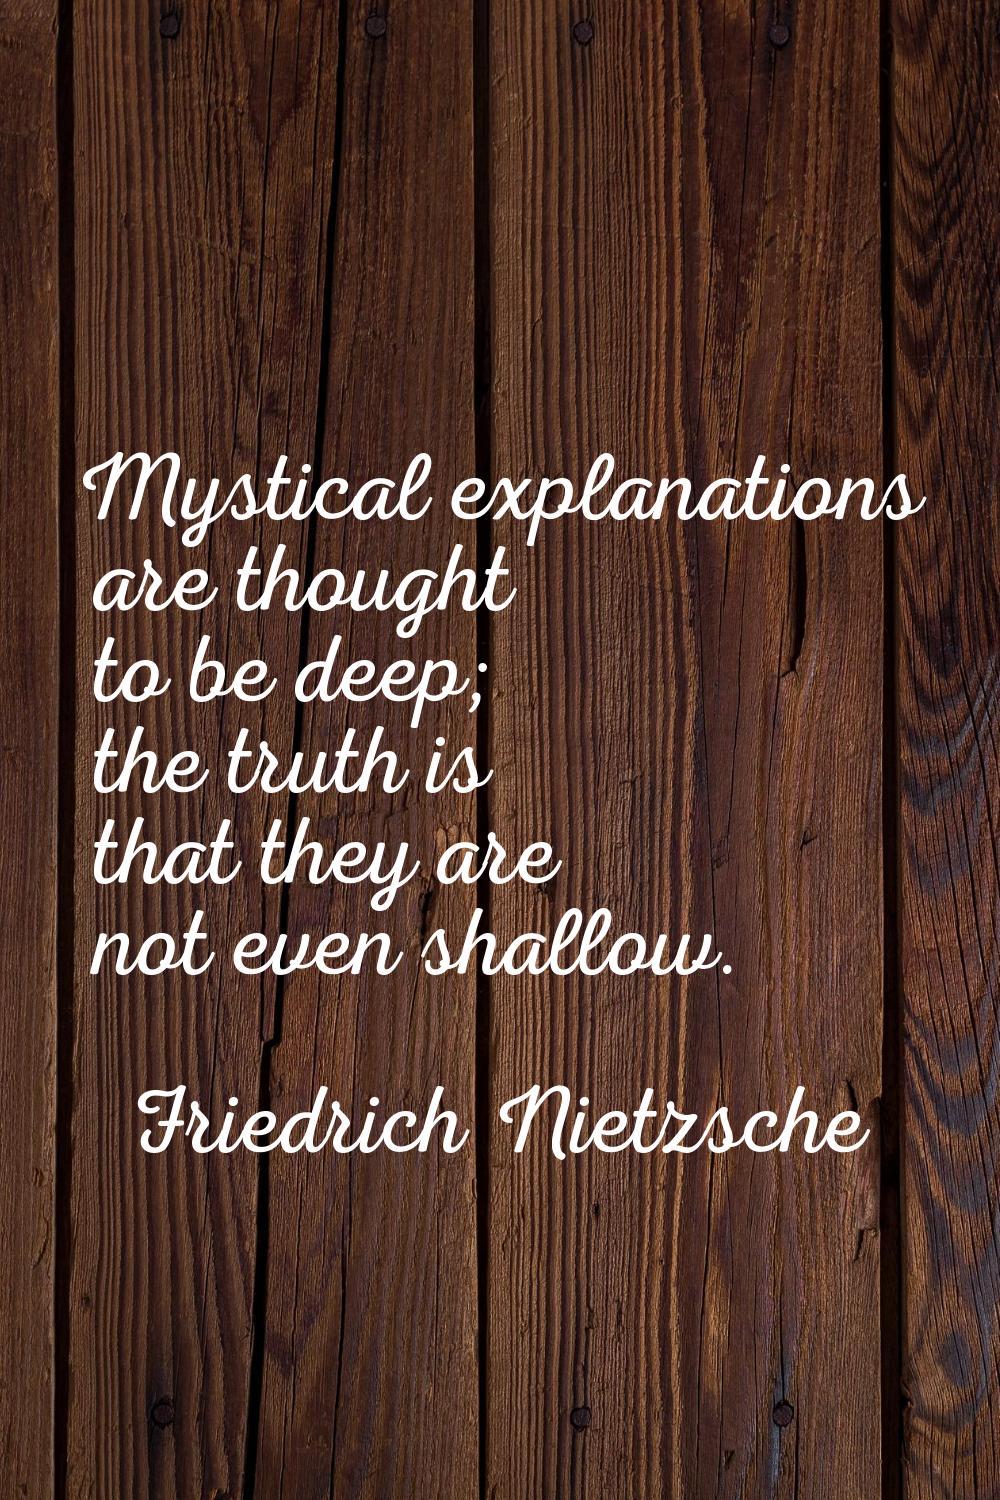 Mystical explanations are thought to be deep; the truth is that they are not even shallow.